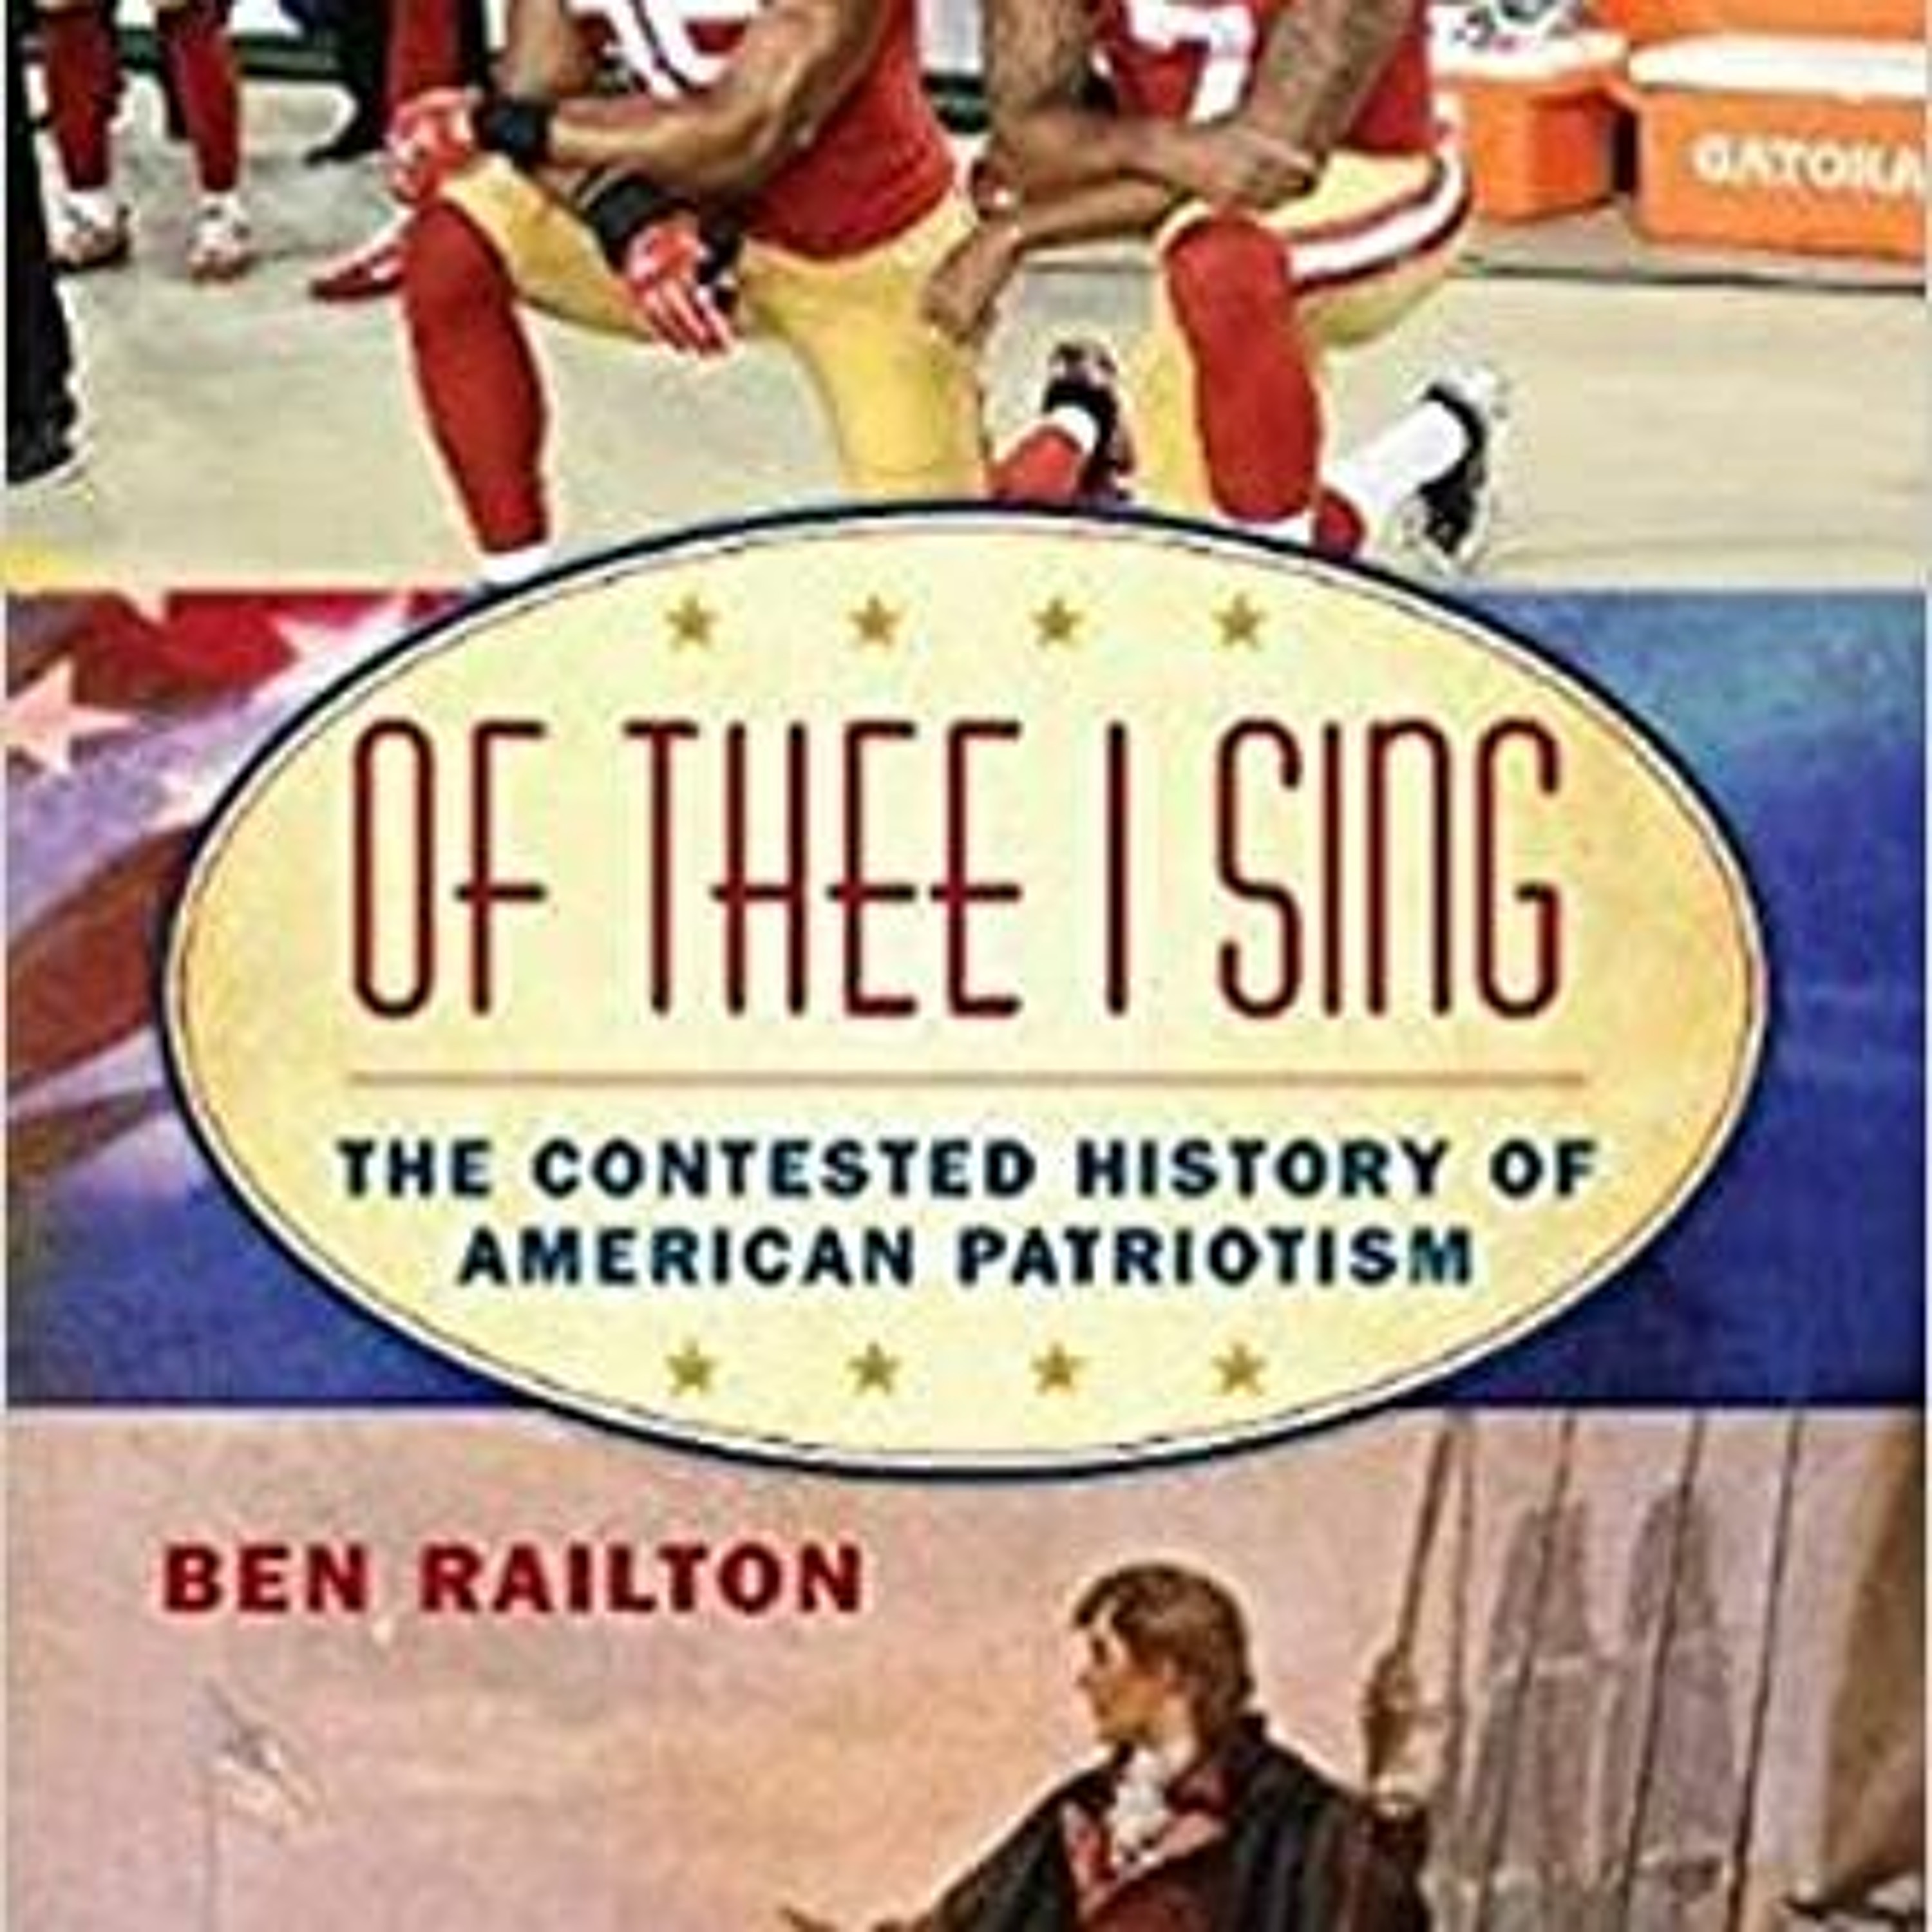 Ben Railton, ”Of Thee I Sing: The Contested History of American Patriotism”